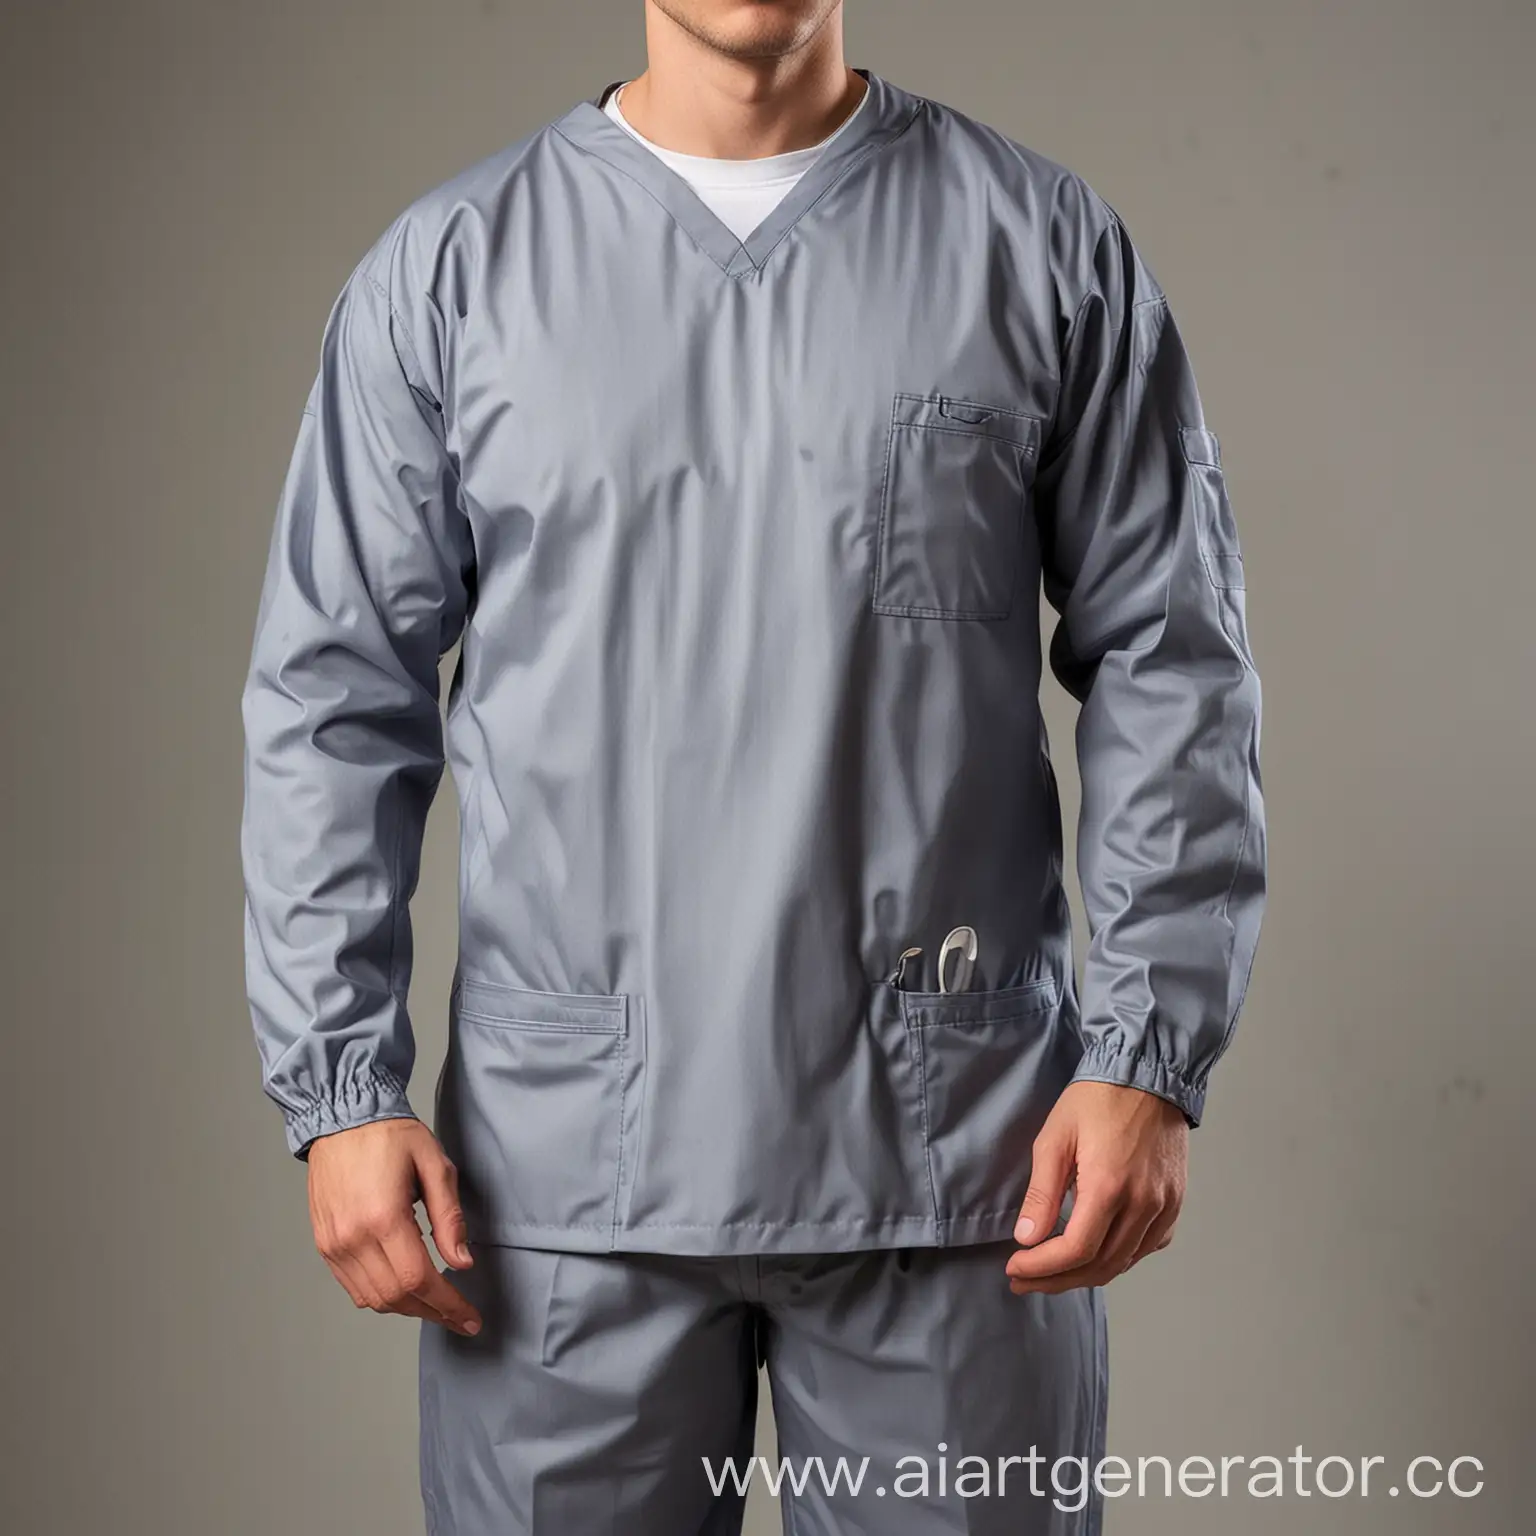 Professional-Doctor-in-Gray-Medical-Suit